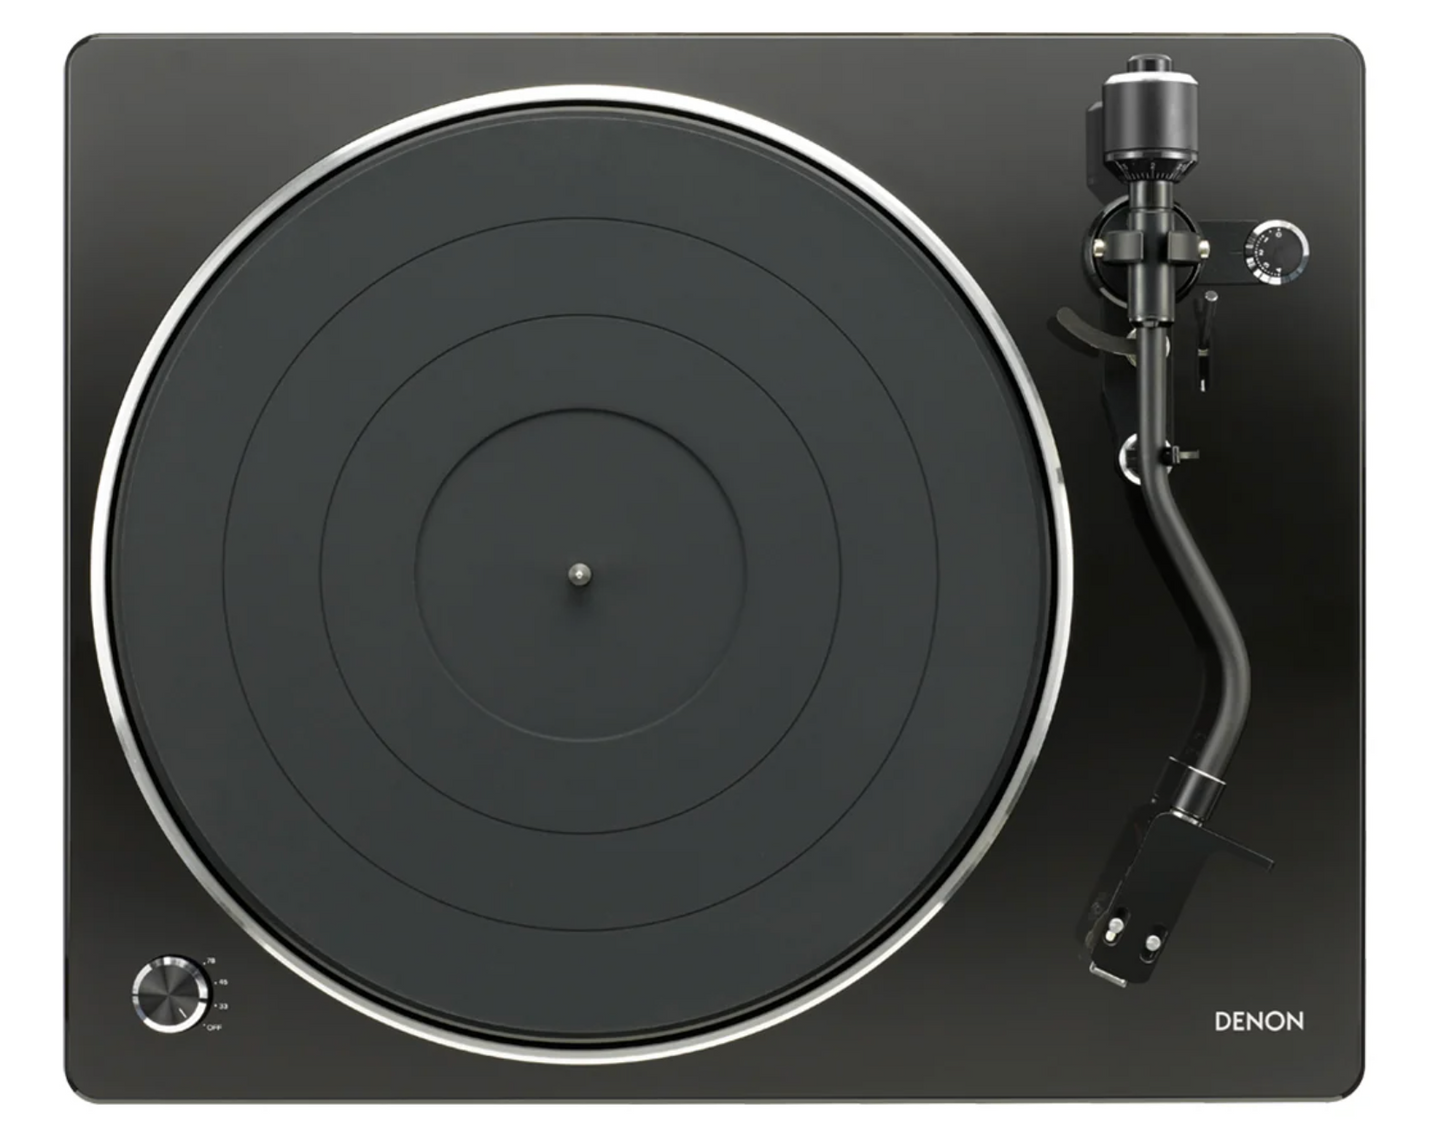 Denon DP-400 Turntable with Built in Phono Preamp, helicopter view